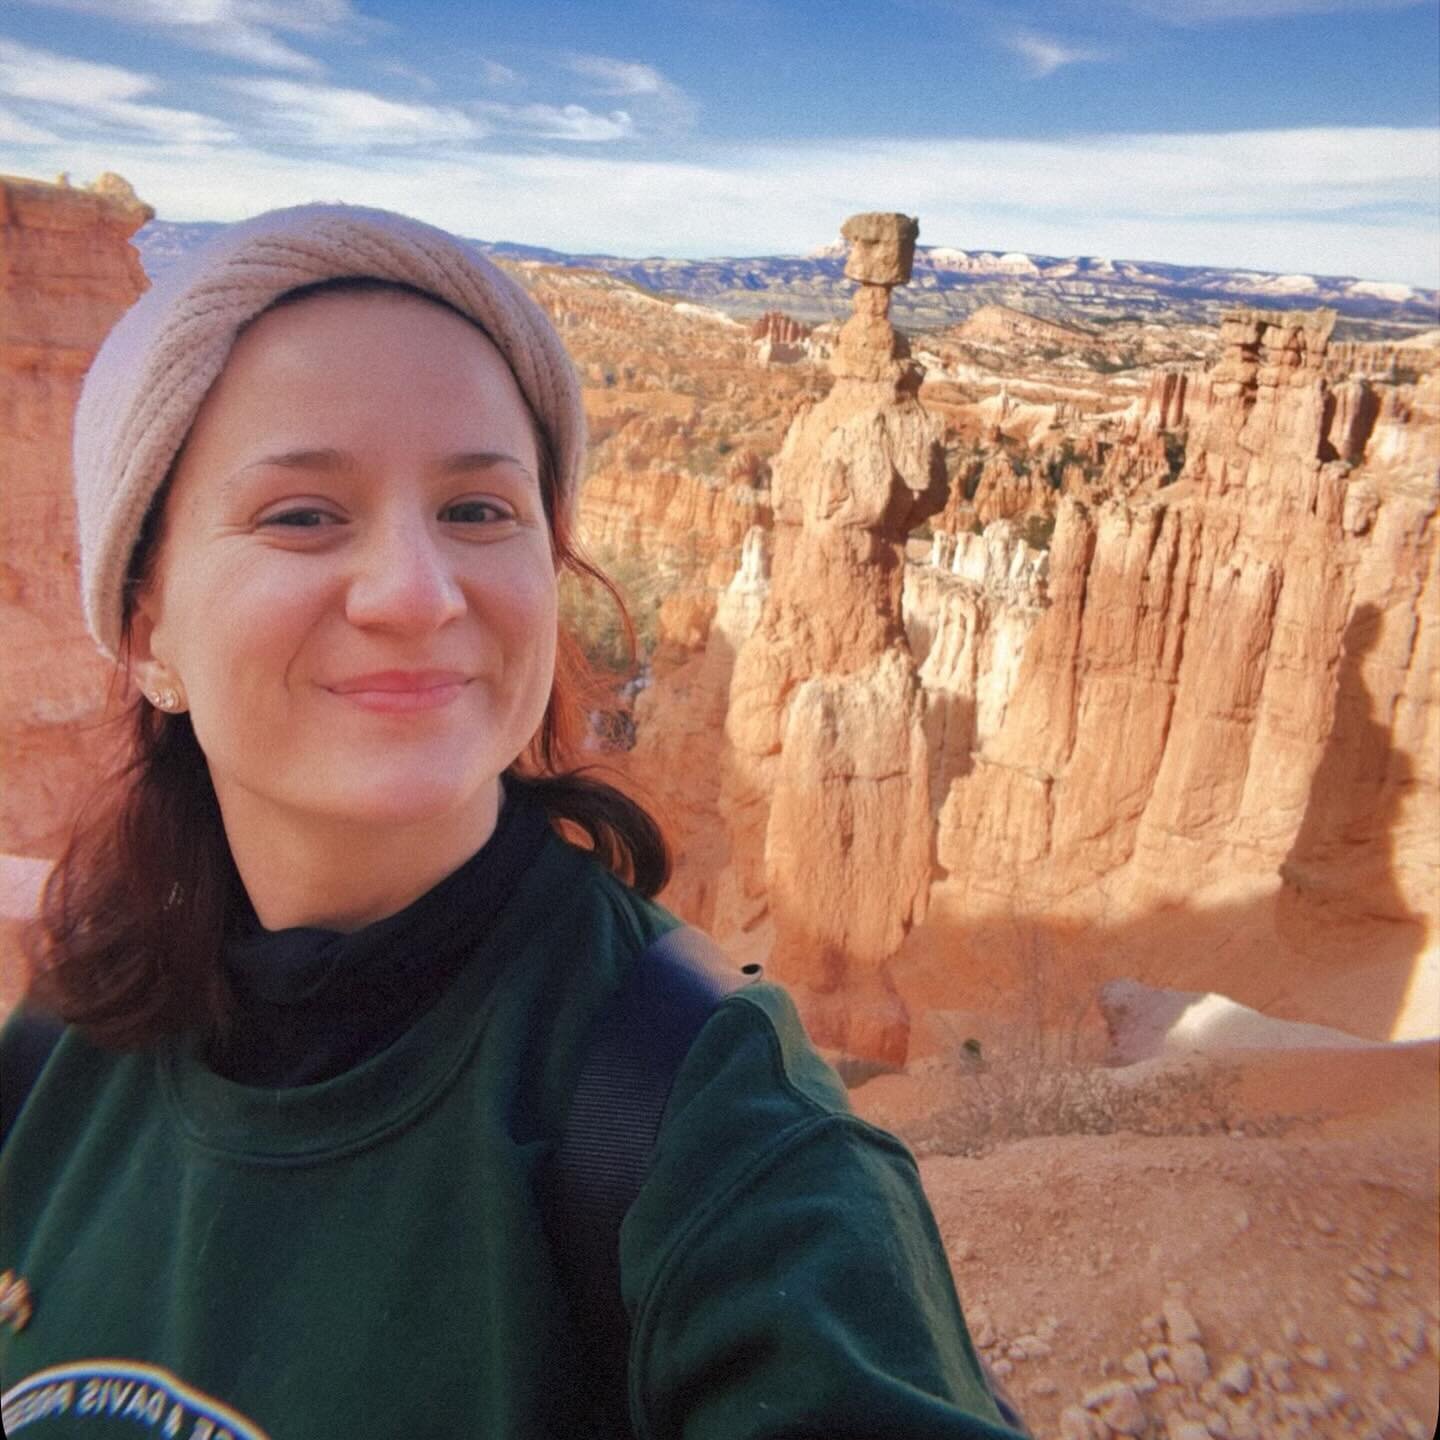 HooDoo you dooooo???
&bull;
&bull;
&bull;
&bull;
&bull;
Spent my last day off in Utah with the family at Bryce Canyon. Pure magic. 🥾🤍